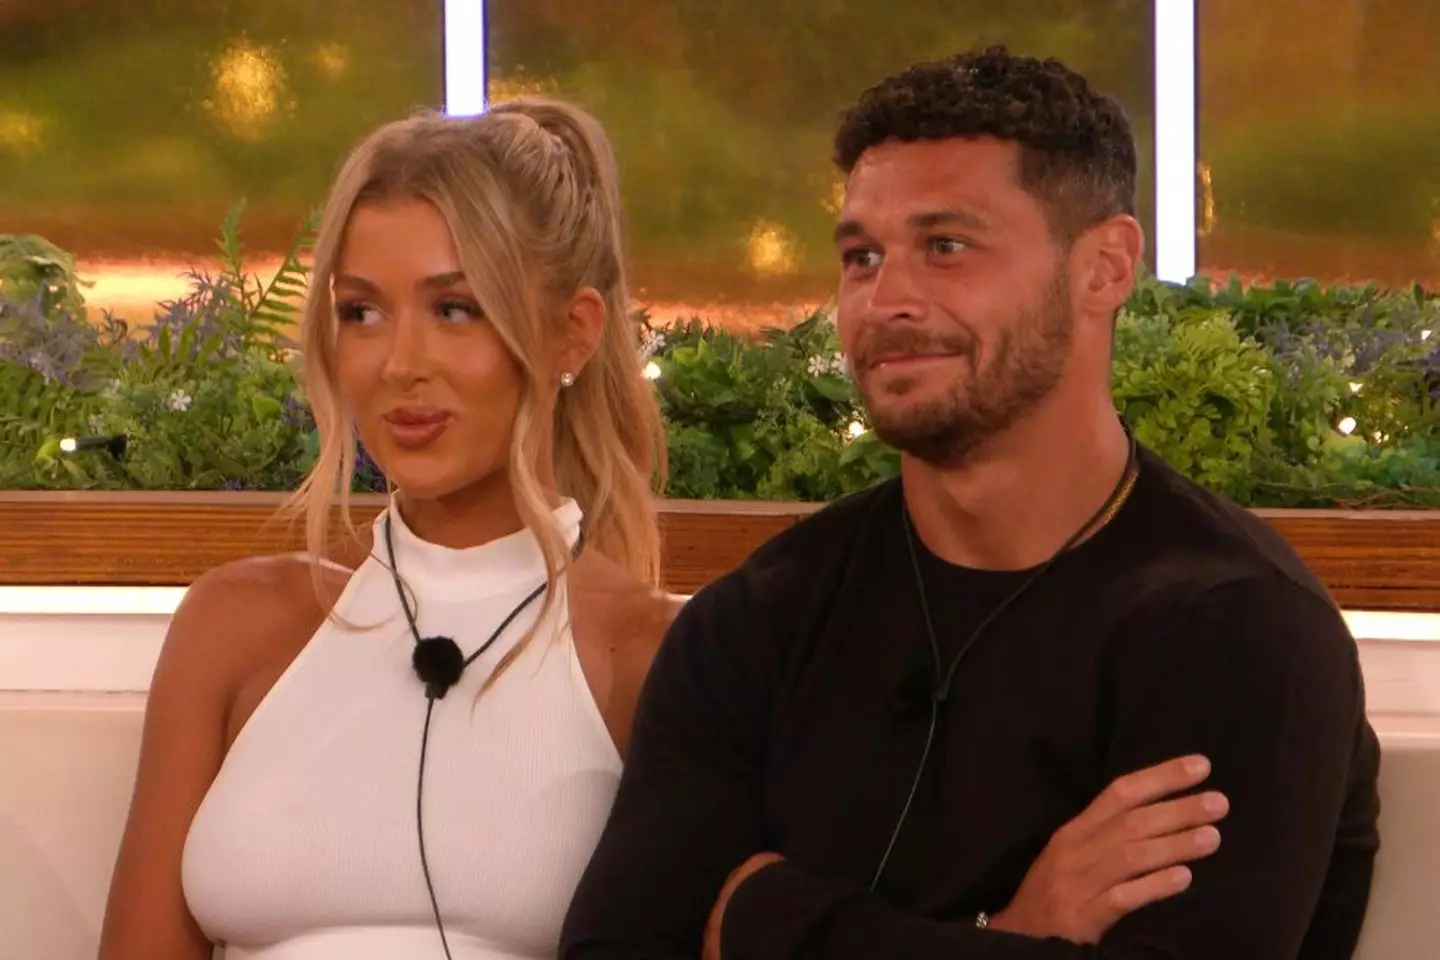 The couple became official on the All Stars version. (ITV)